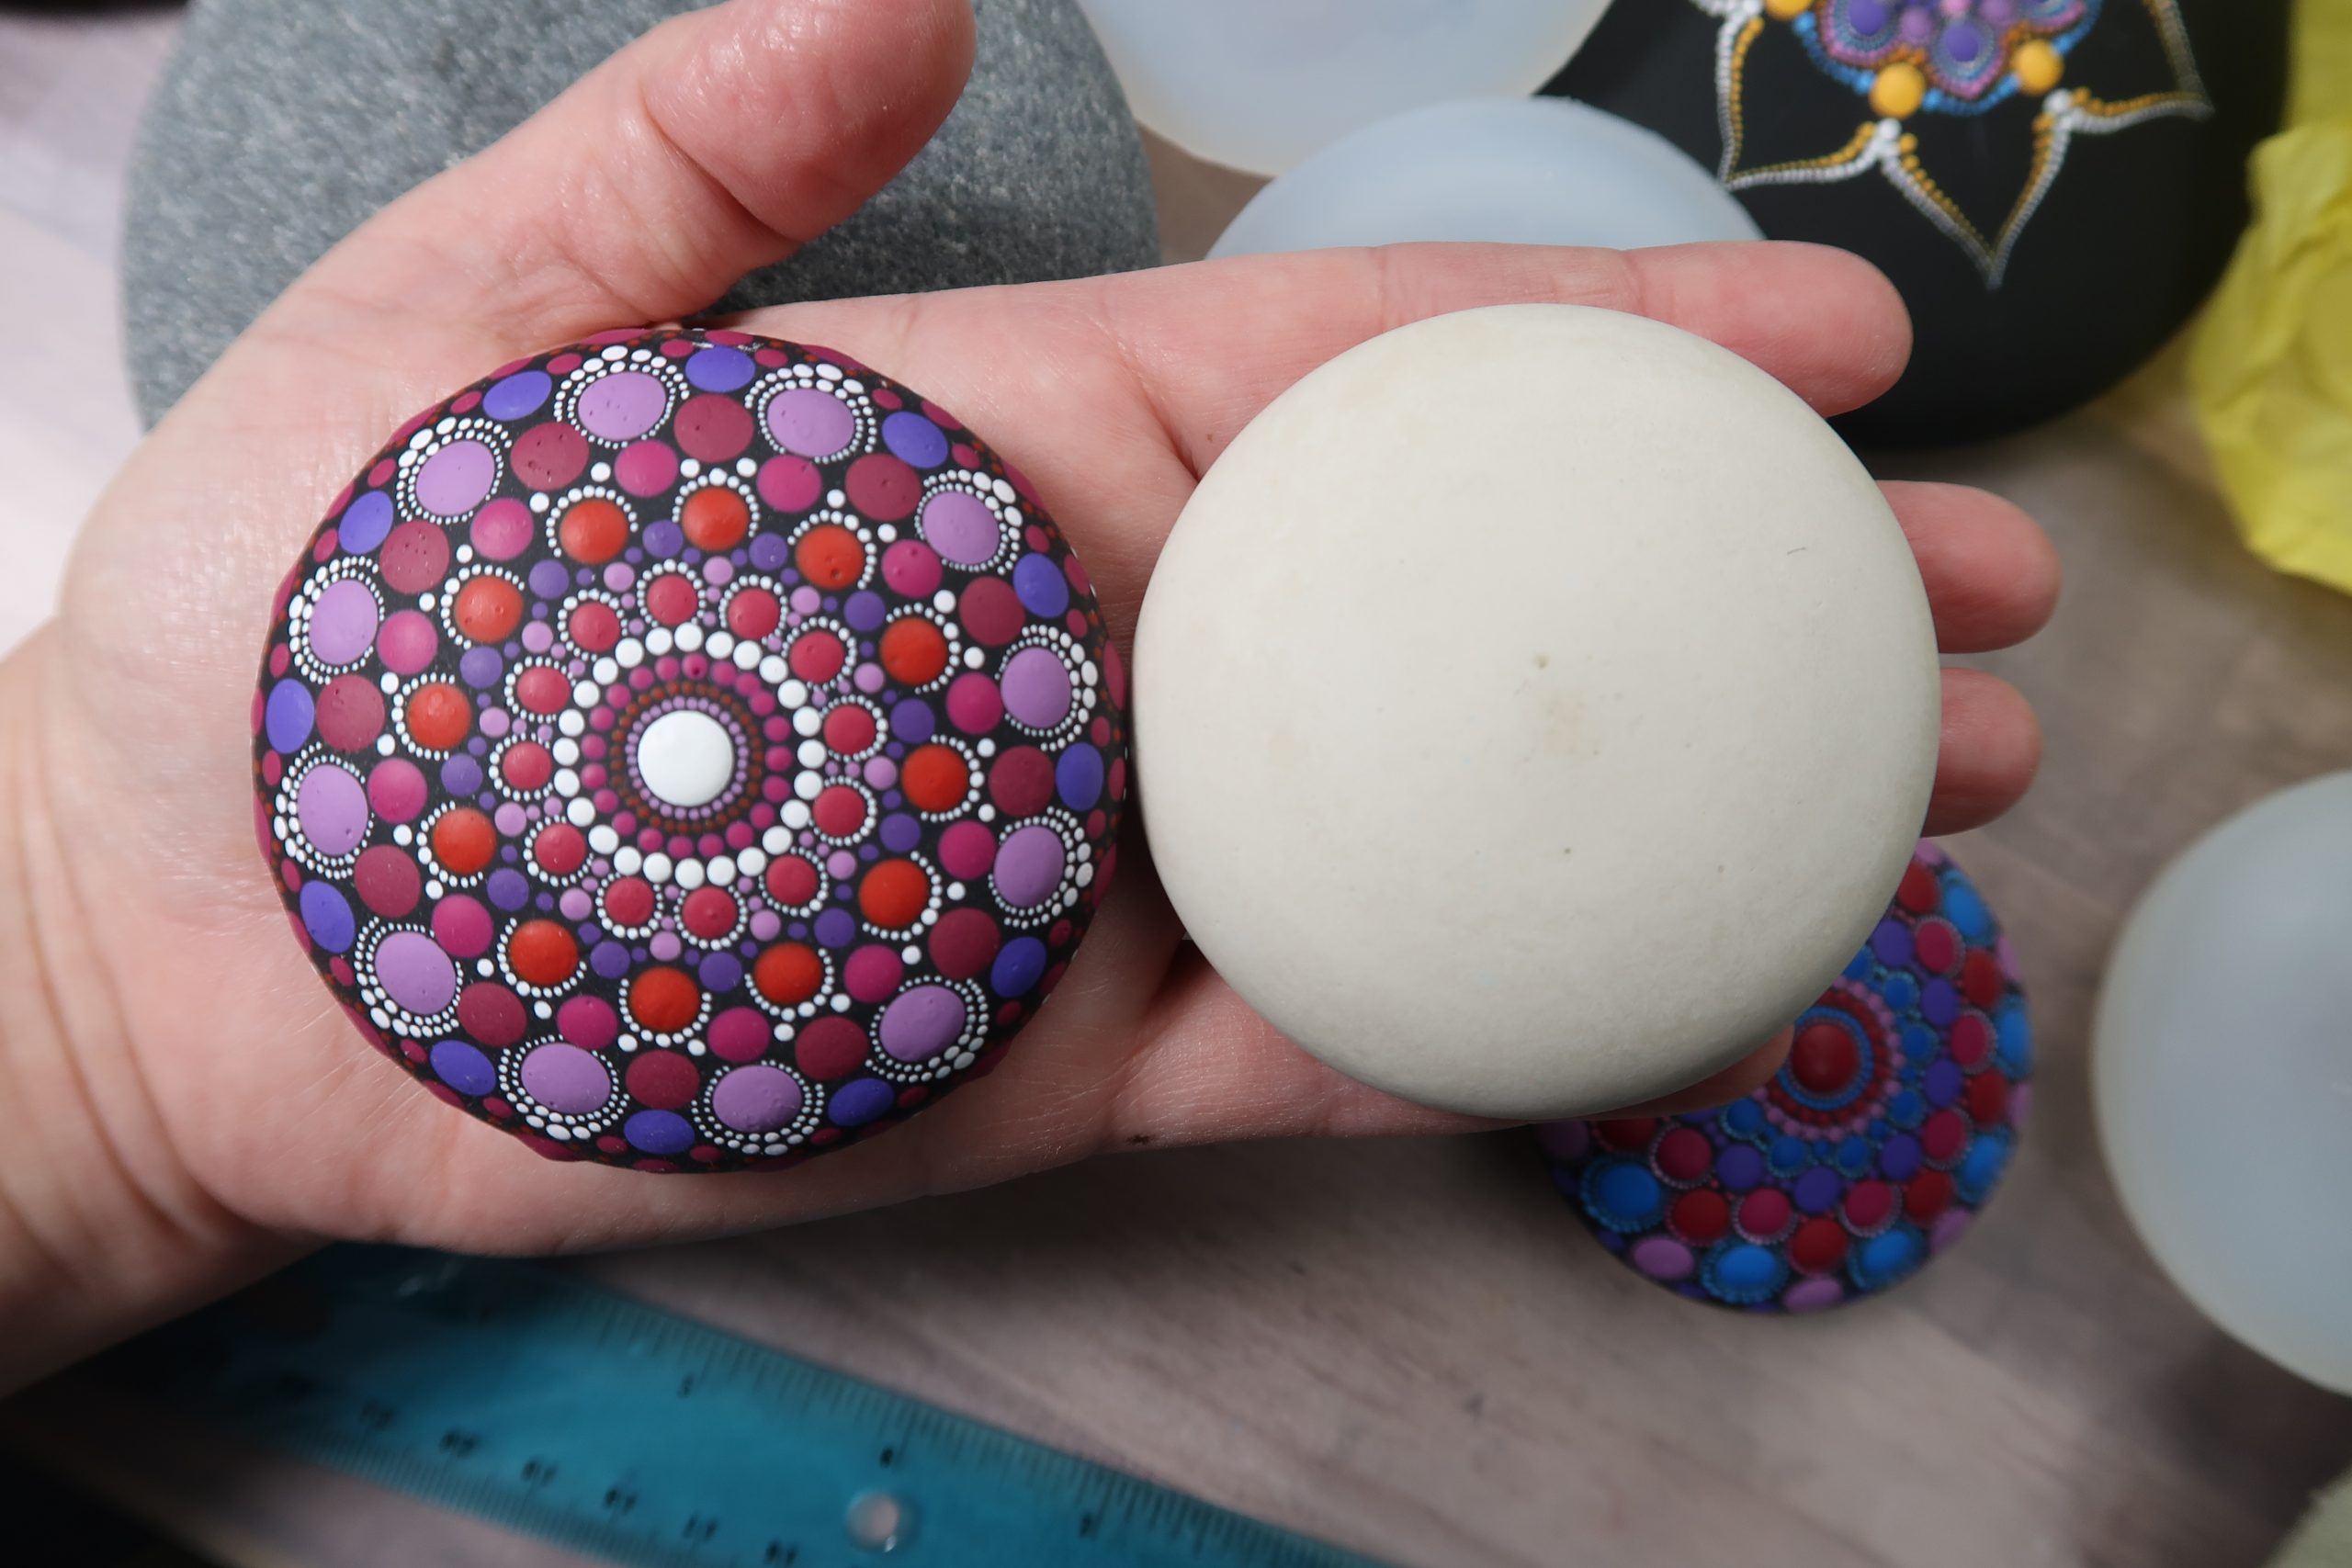 Buy Stone Mold - for Making Stones for Painting - Happy Dotting Company -  Large Round Shape - Smooth Casting with inbuilt Center for Dotting Mandala  and Stone dot Art - to